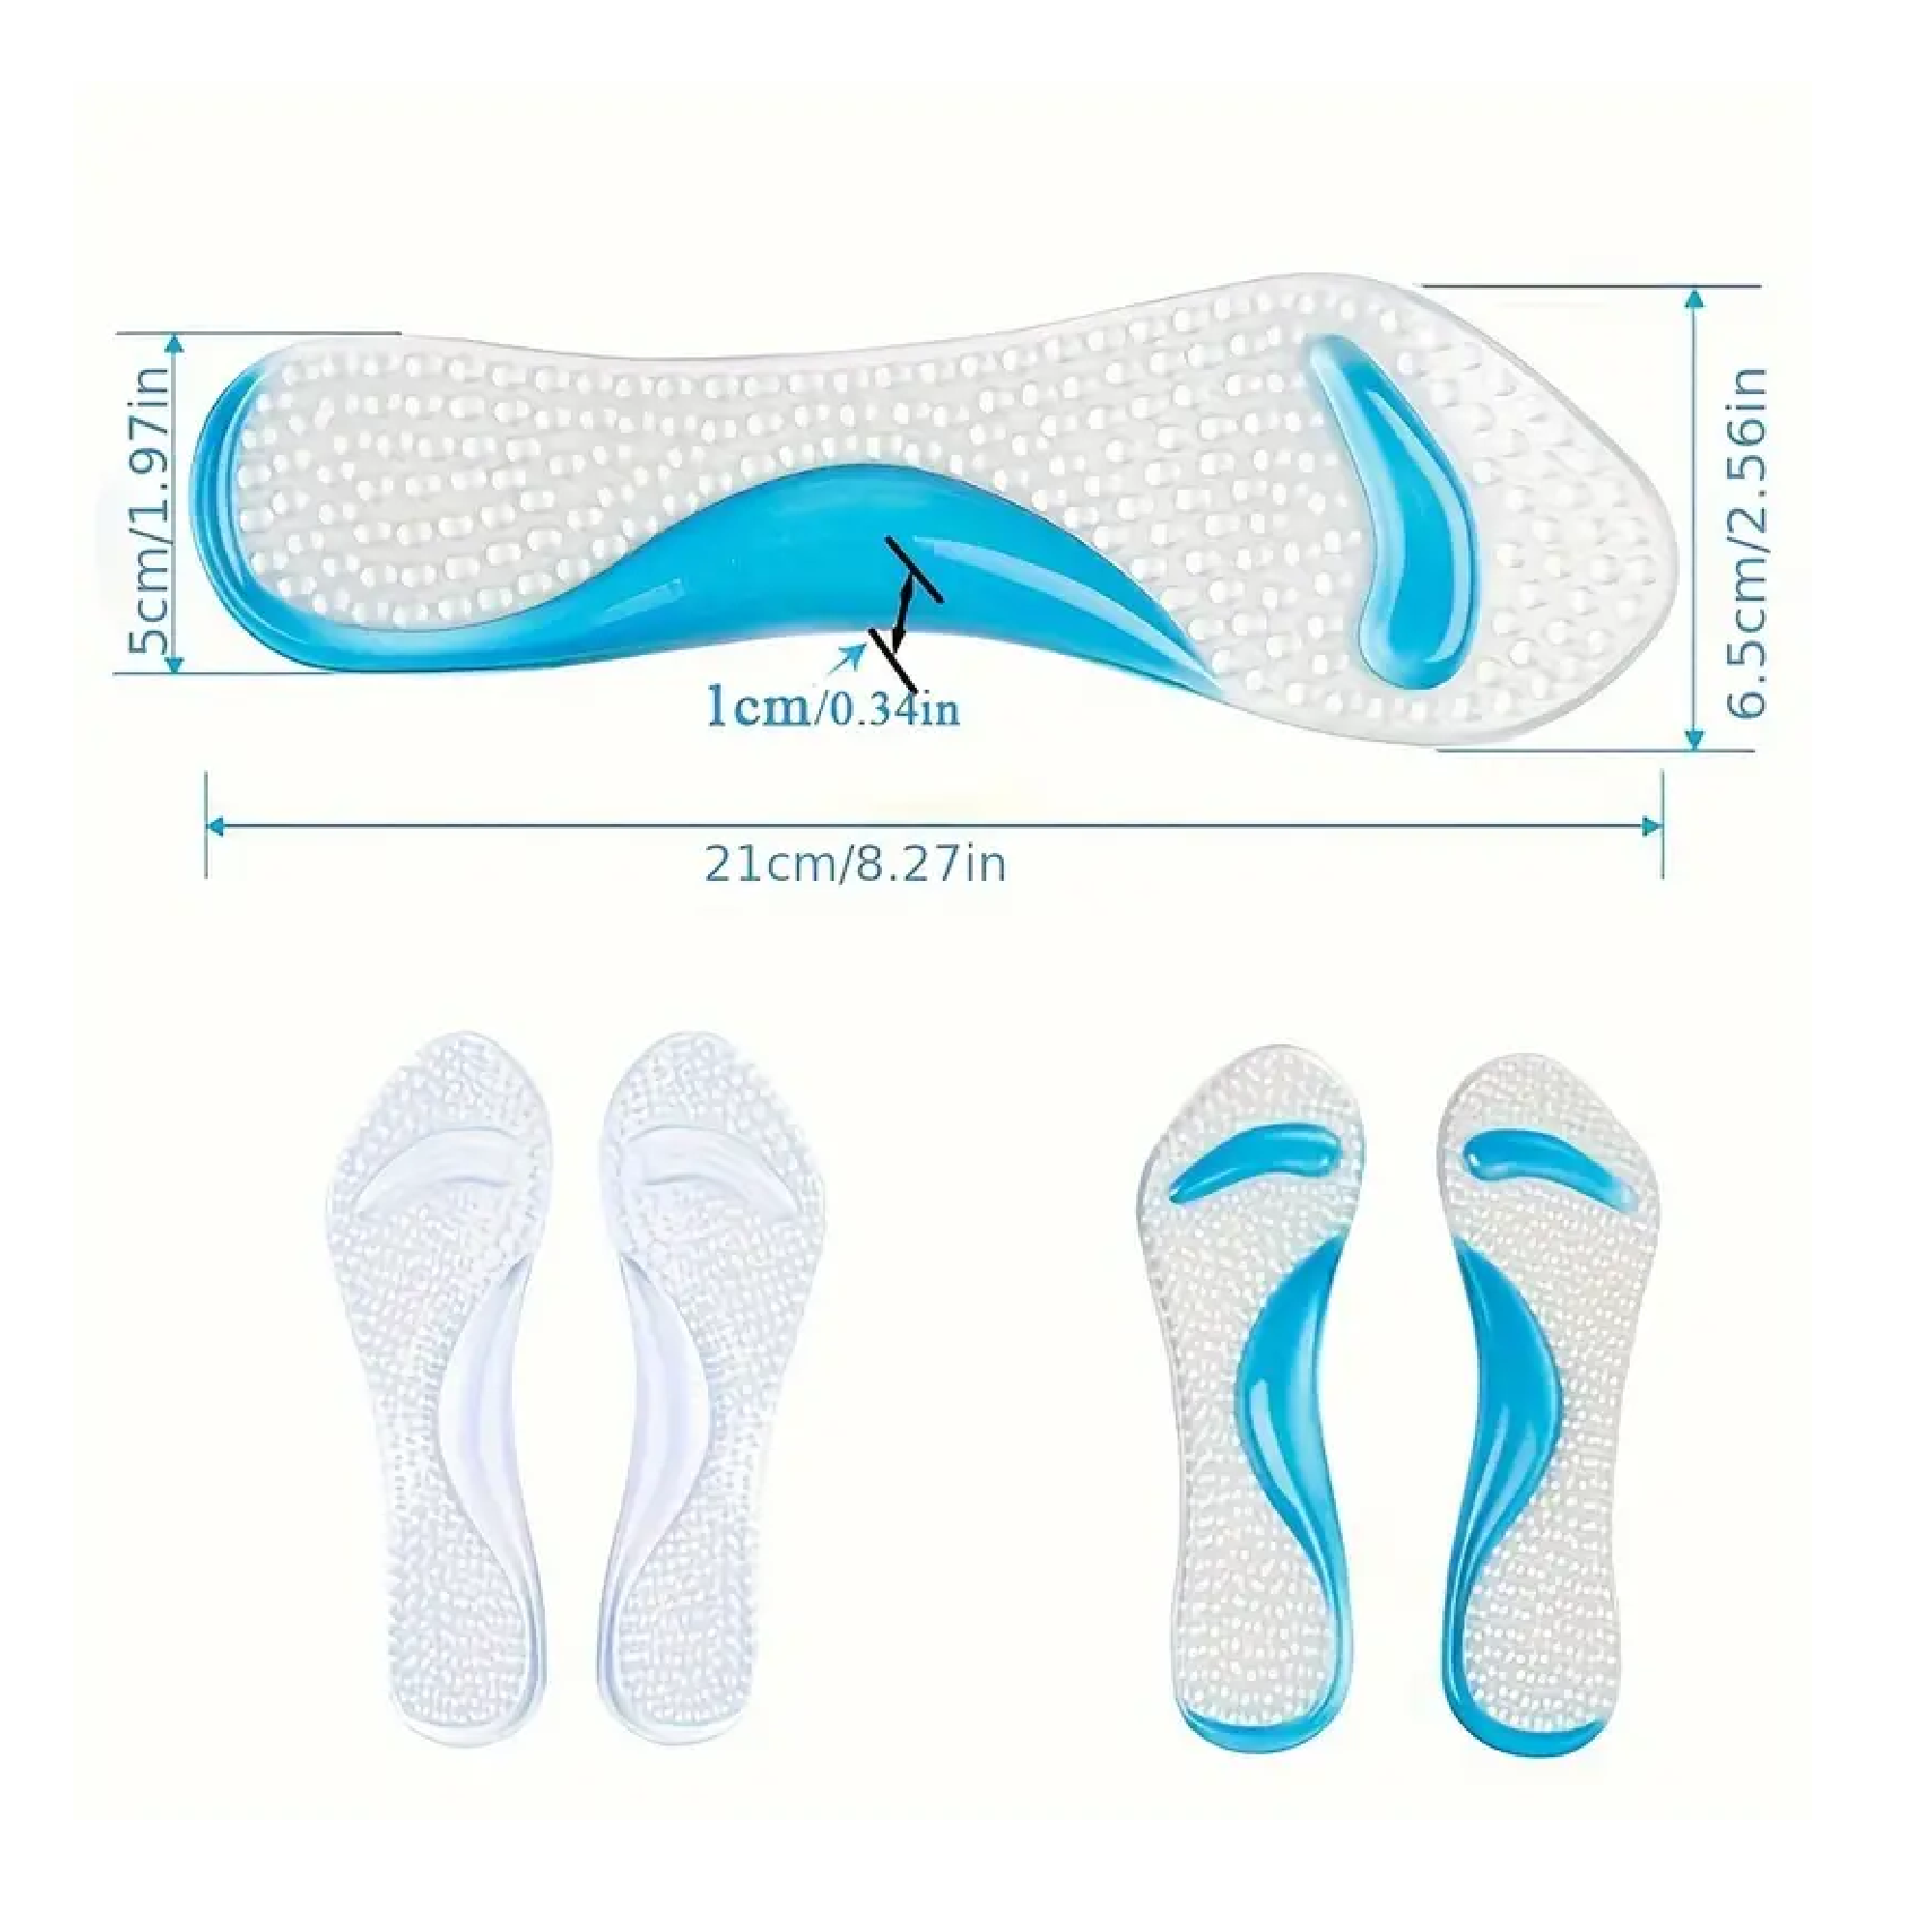 1 Pair Arch Support Pads For High Heels - Non-Slip Massage Adjustable Insoles, Women's Flat Foot Arch Support Pads